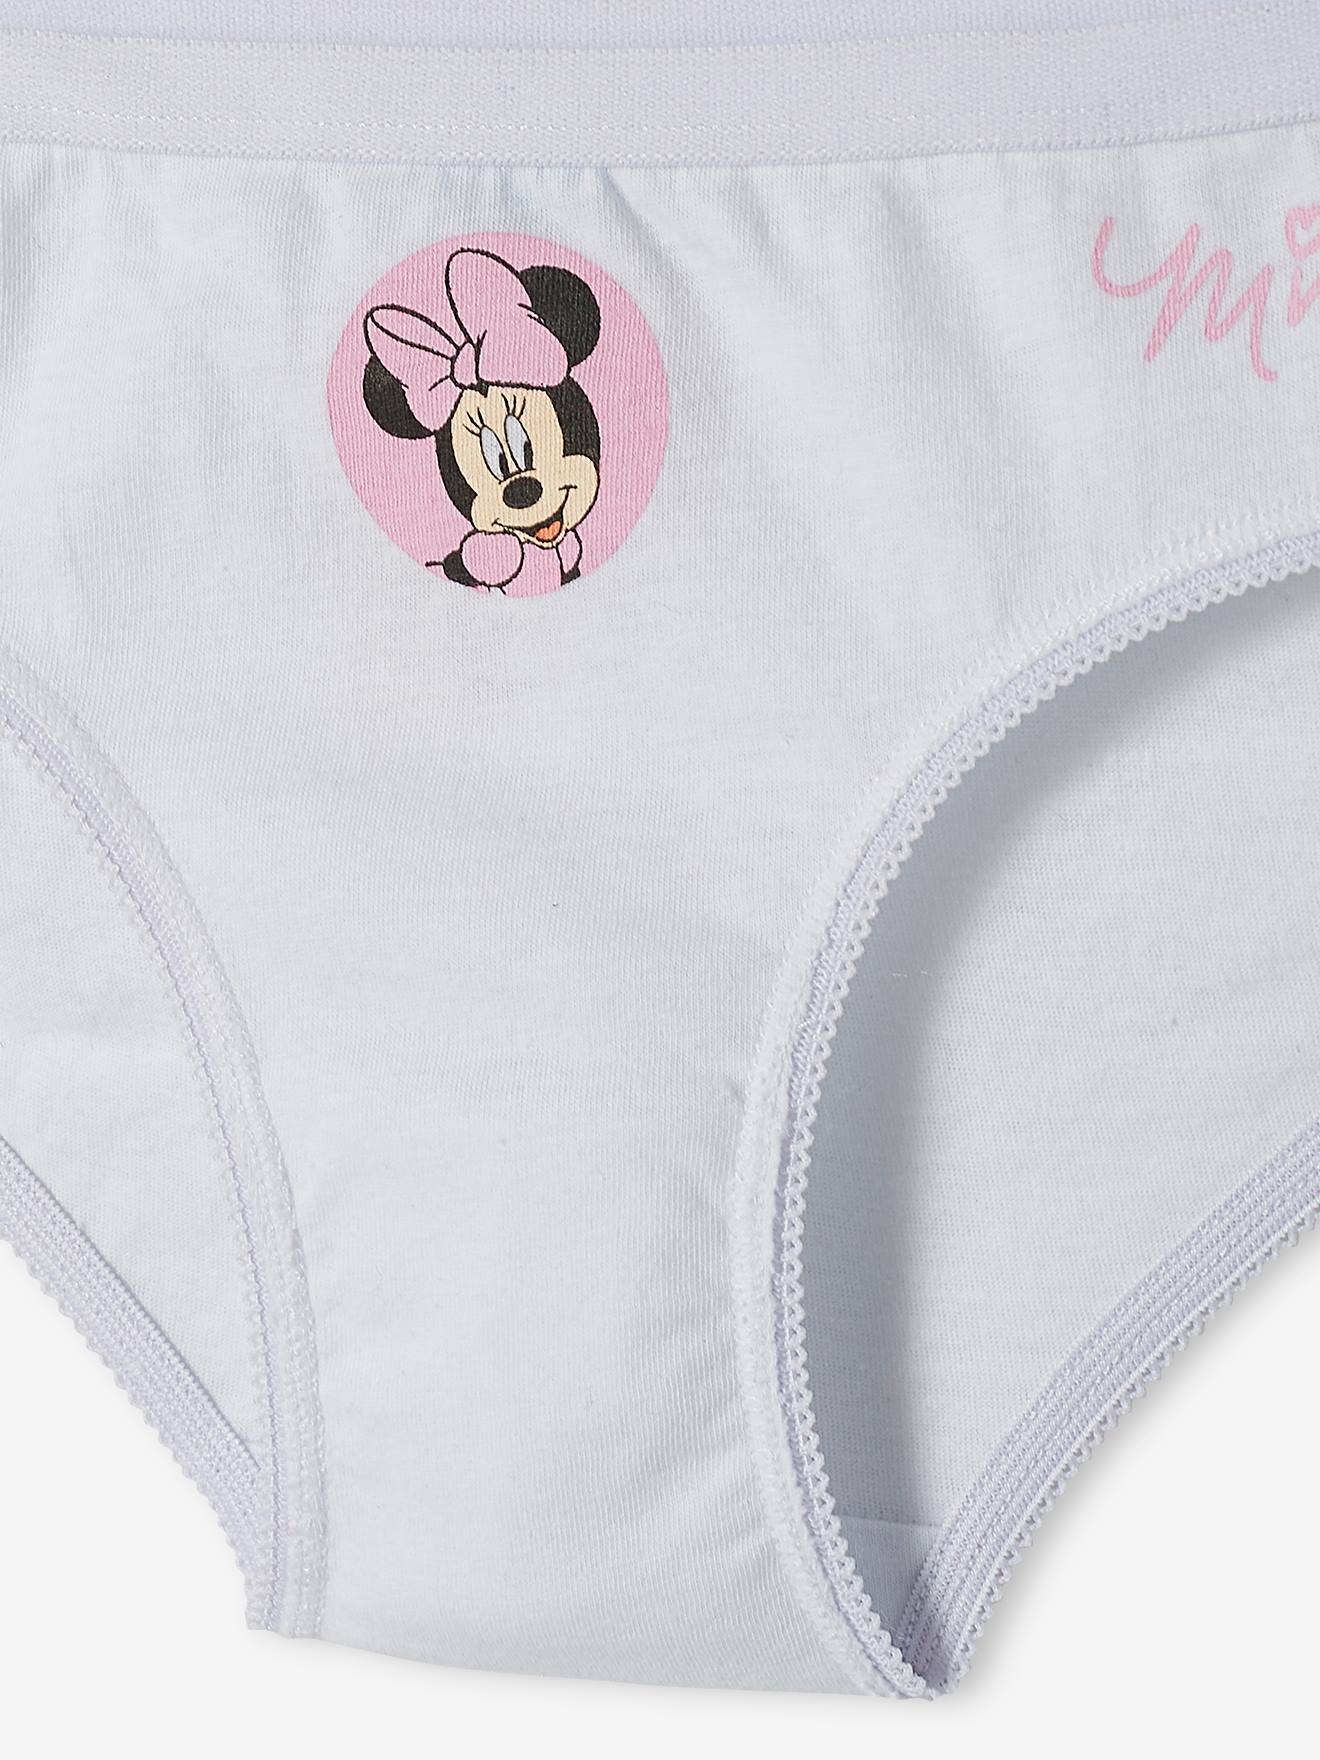 Underwear – Disney Minnie Mouse – Girls 2 pack Pink – Simply Bubs